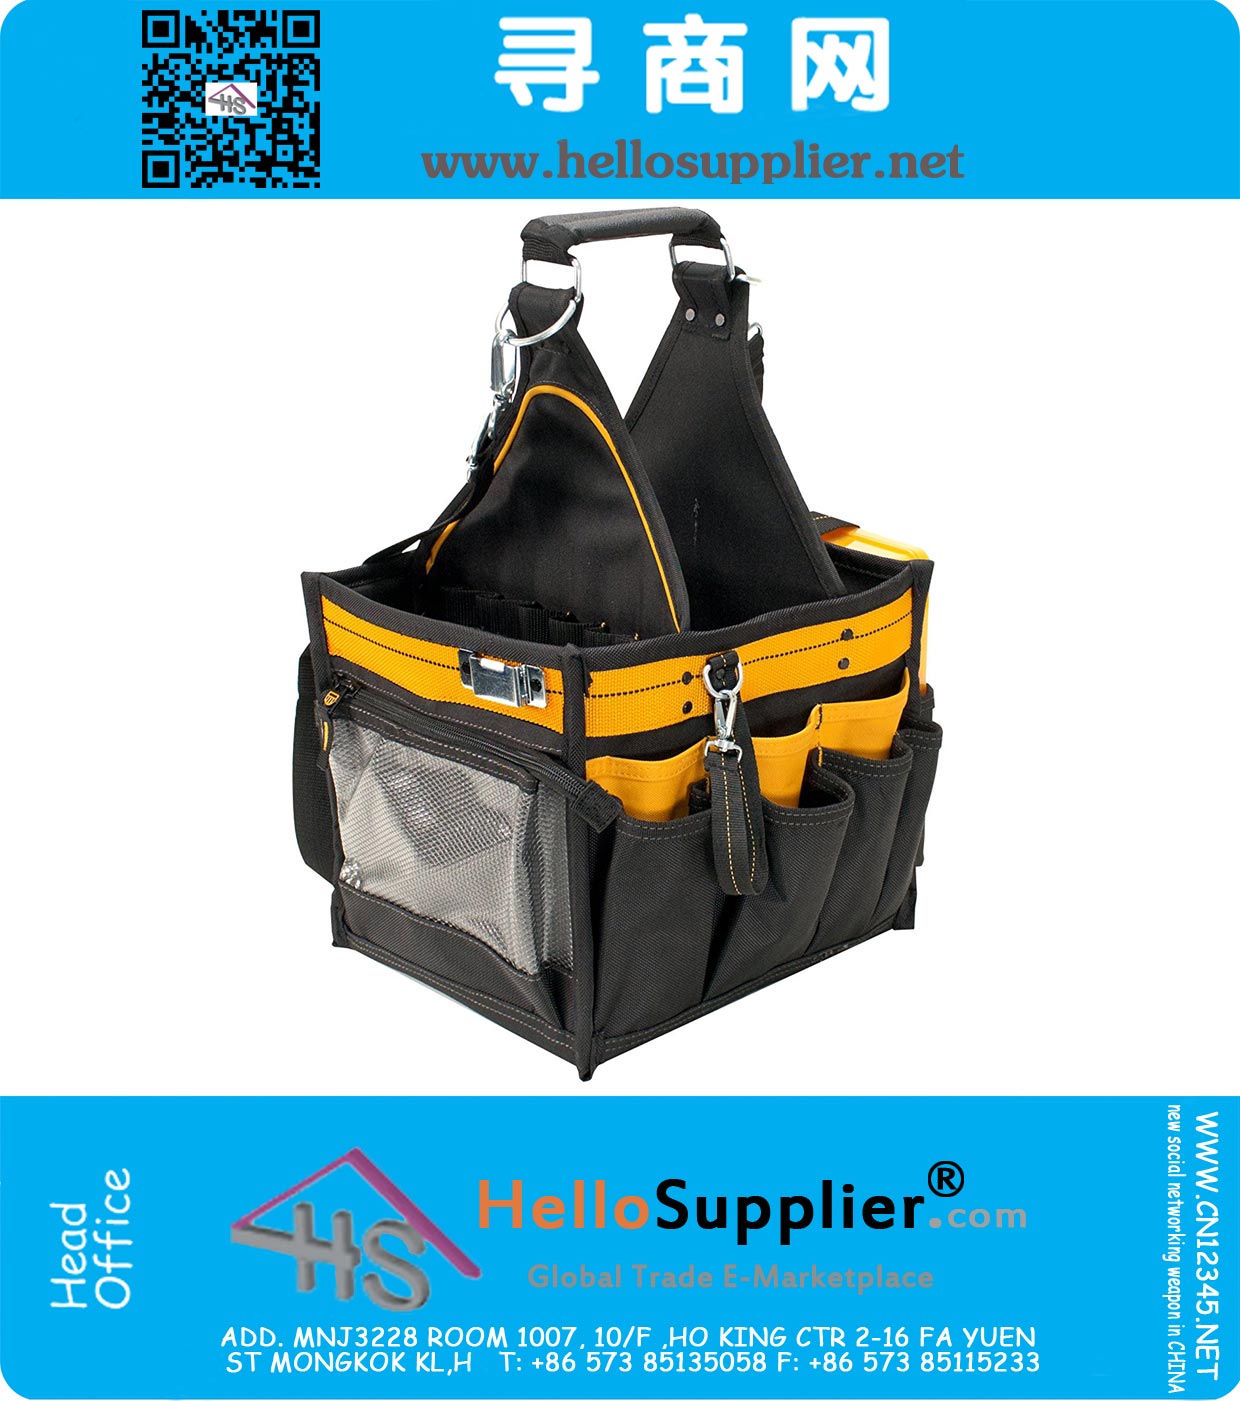 11-Inch Electrical and Maintenance Tool Carrier met Parts Tray